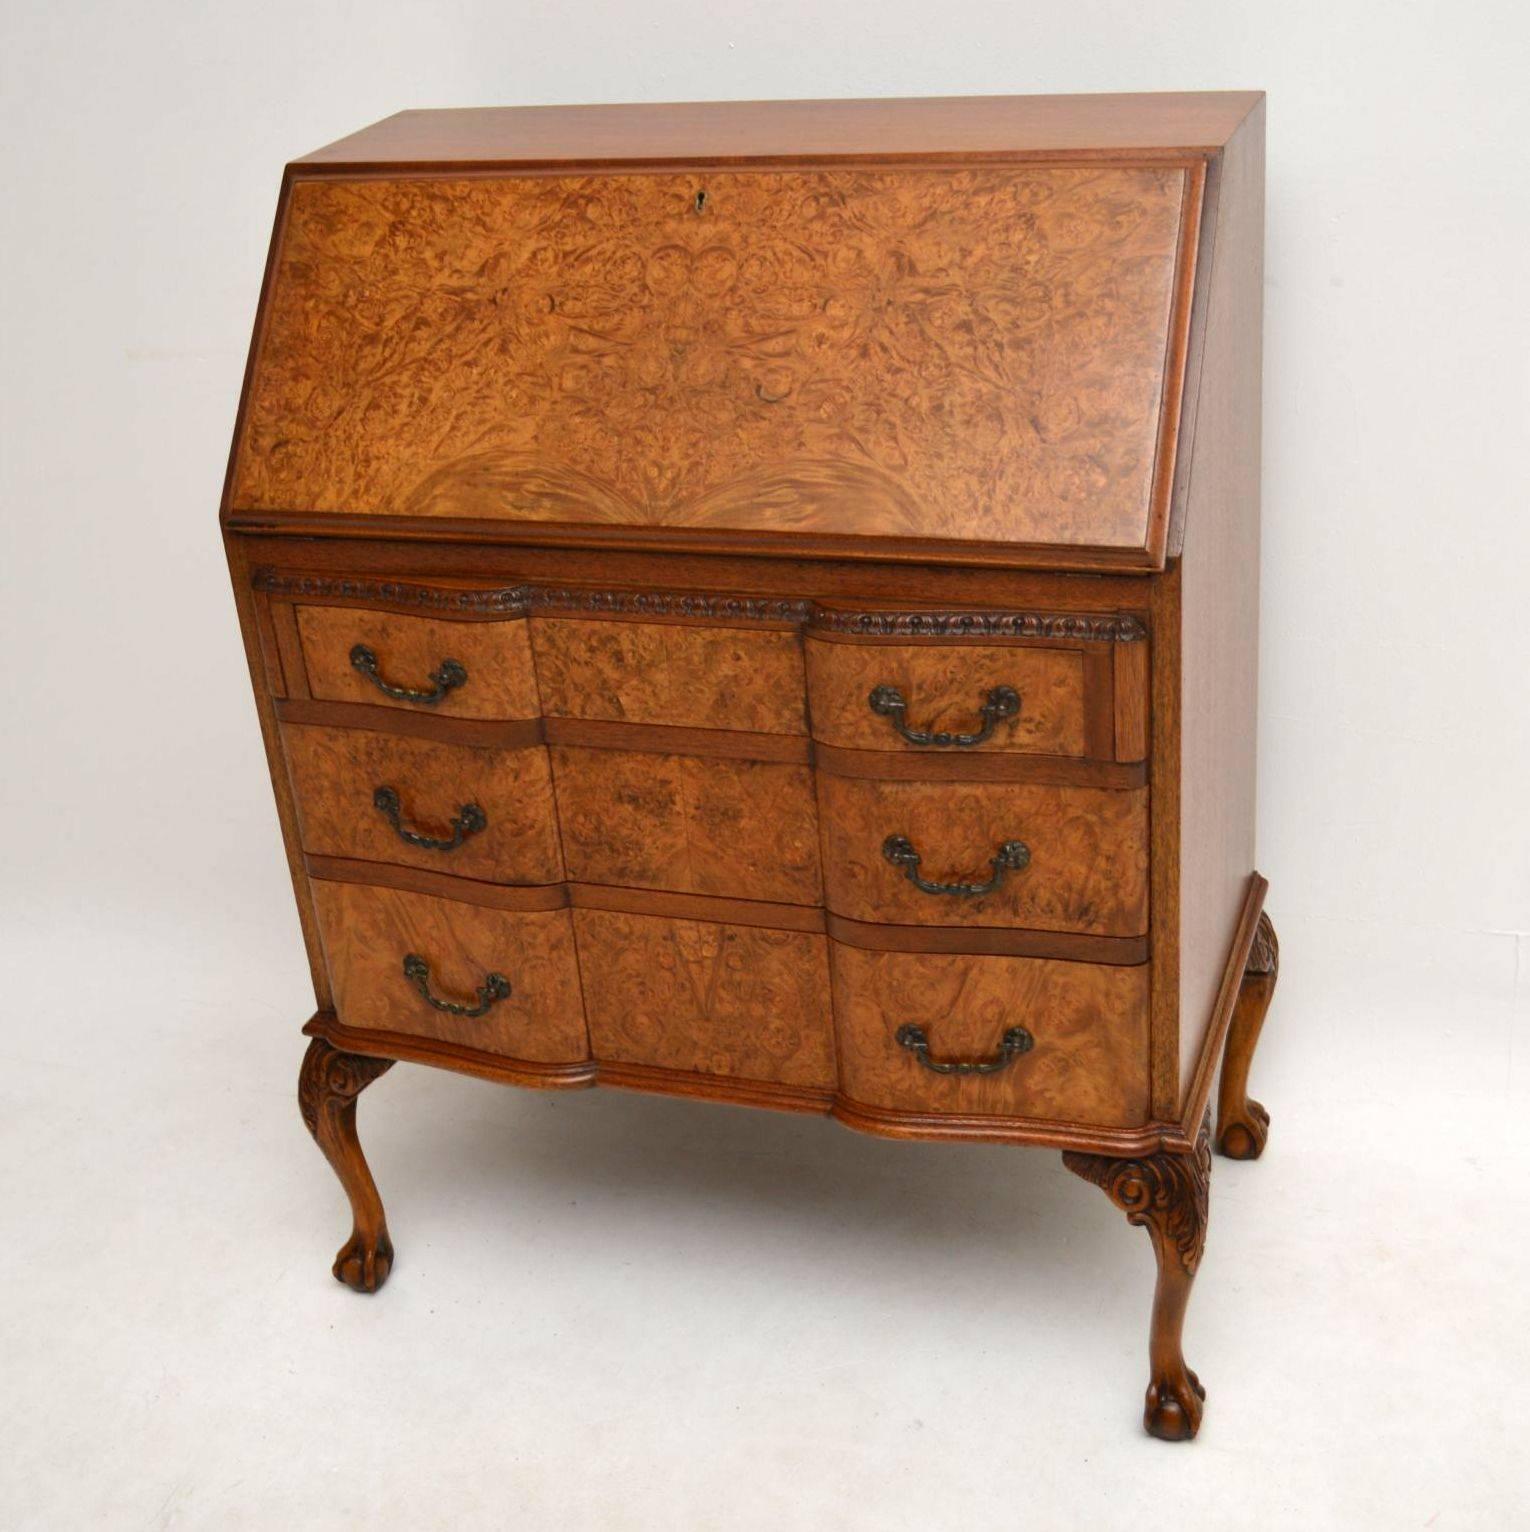 Good quality antique bureau with a well patterned burr walnut front and with figured walnut sides. It has fine carving just above the top drawer & on the tops of the solid walnut legs, which have claw & ball feet. The three shaped drawers are